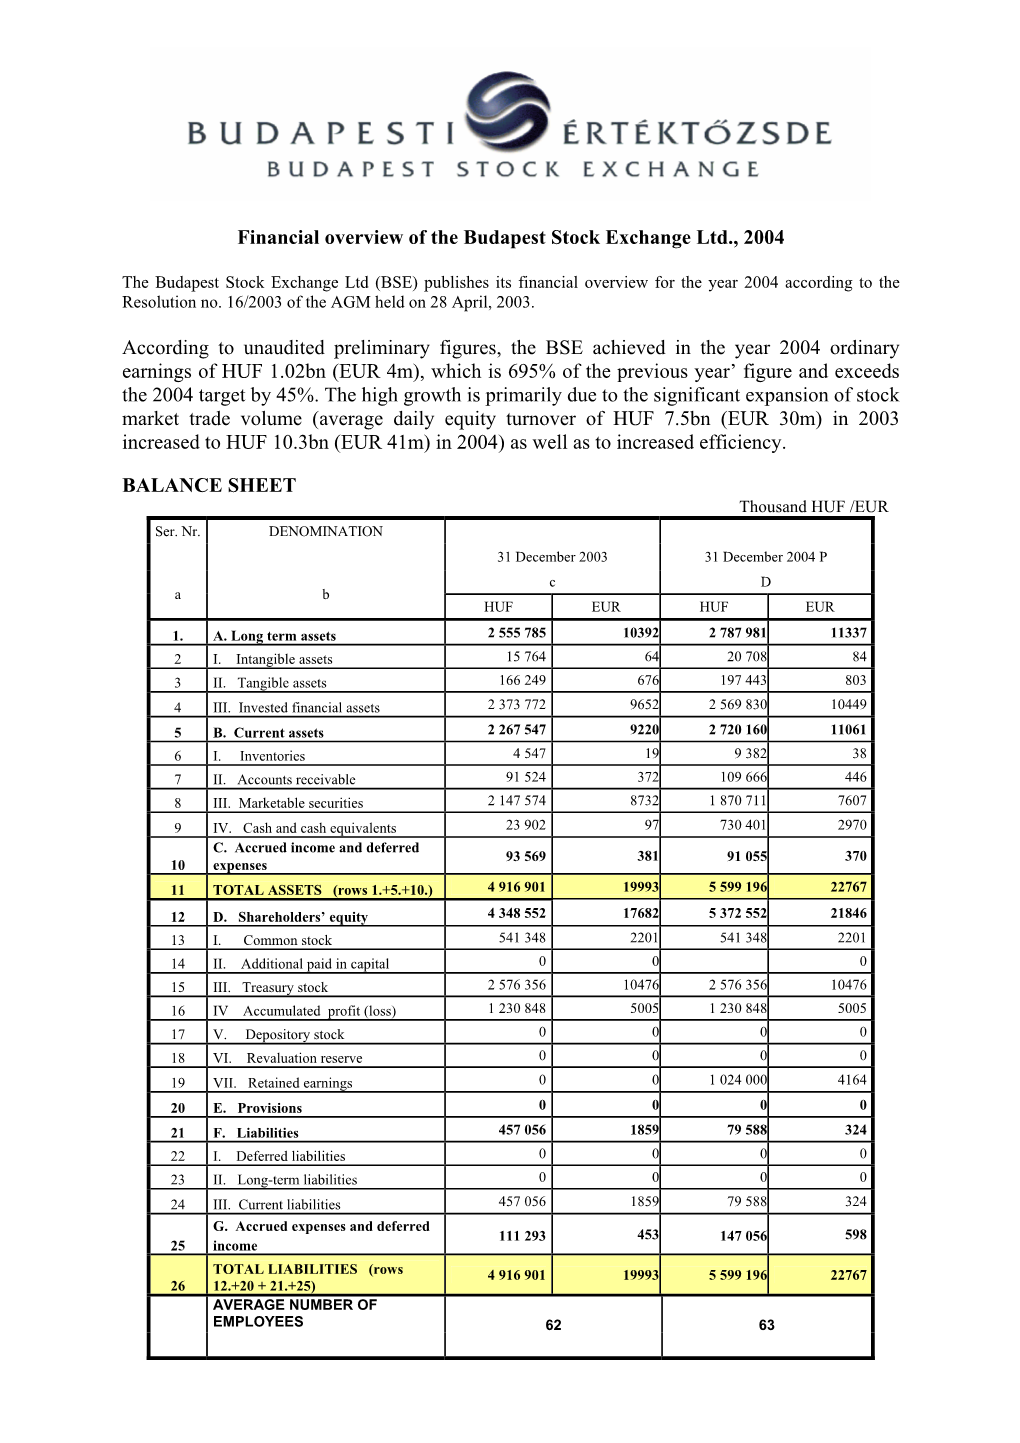 (BSE) Publishes Its Financial Overview for the Year 2004 According to the Resolution No